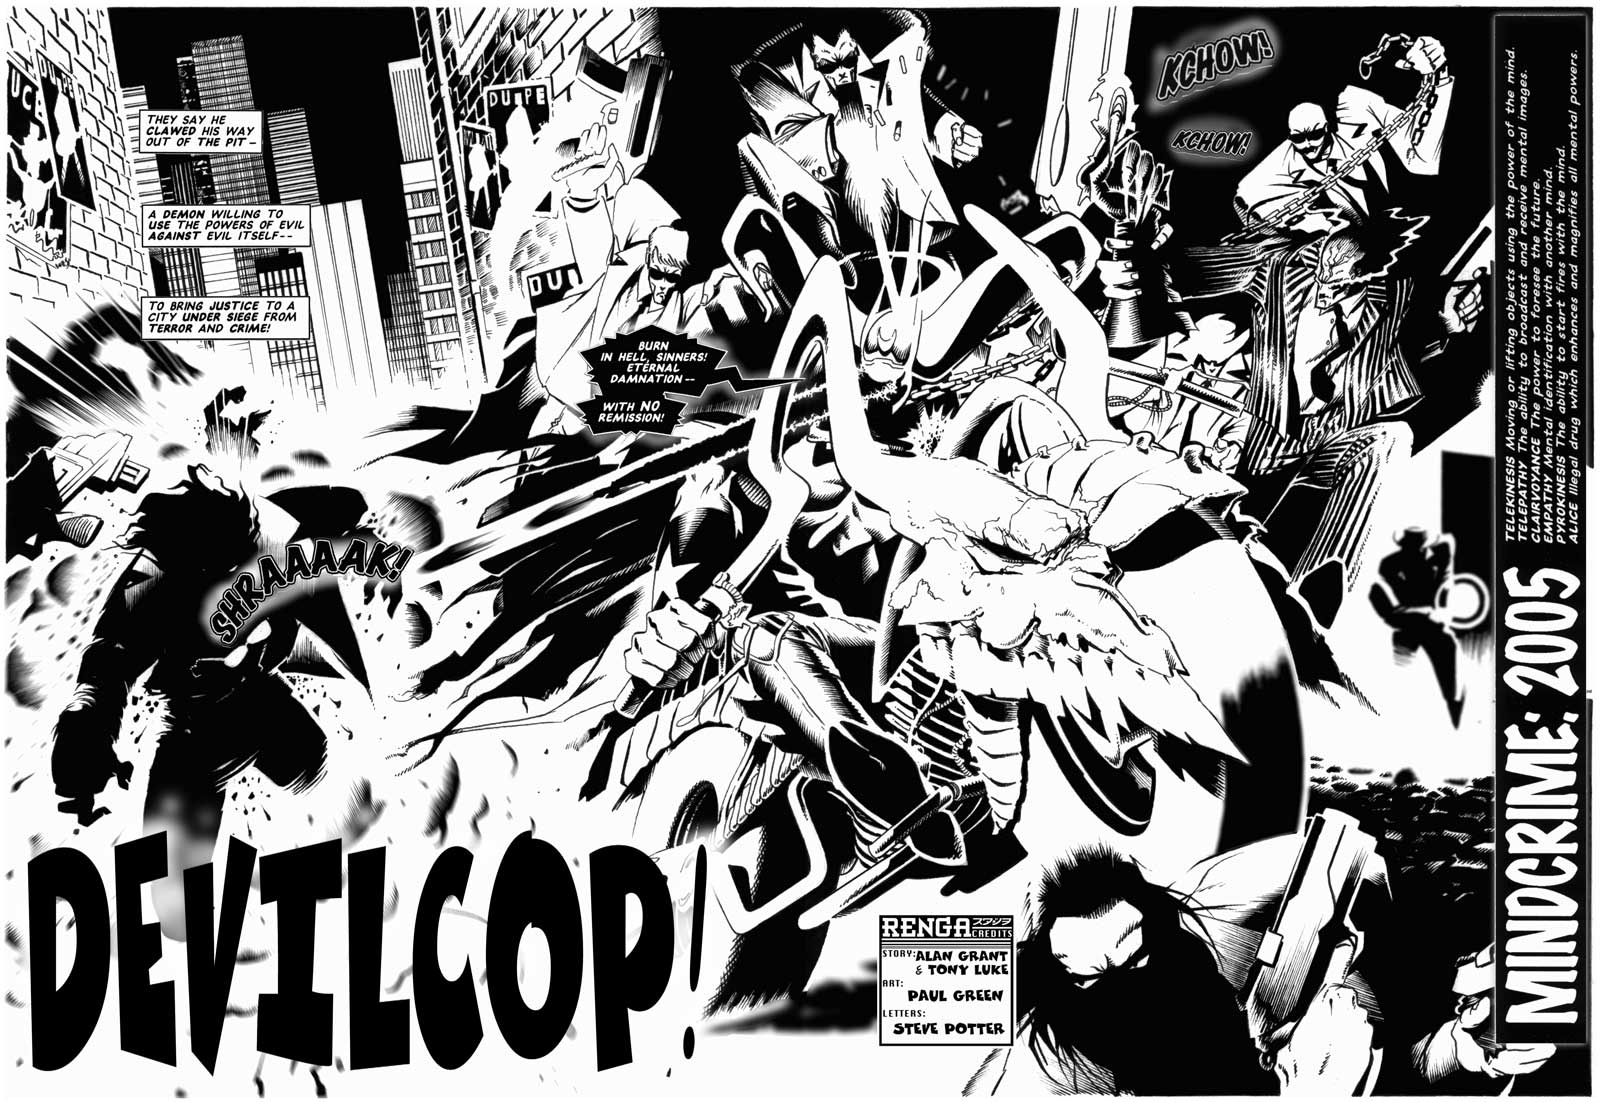 The opening spread of "Devil Cop", written by Alan Grant and Tony Luke, drawn by Paul Green.